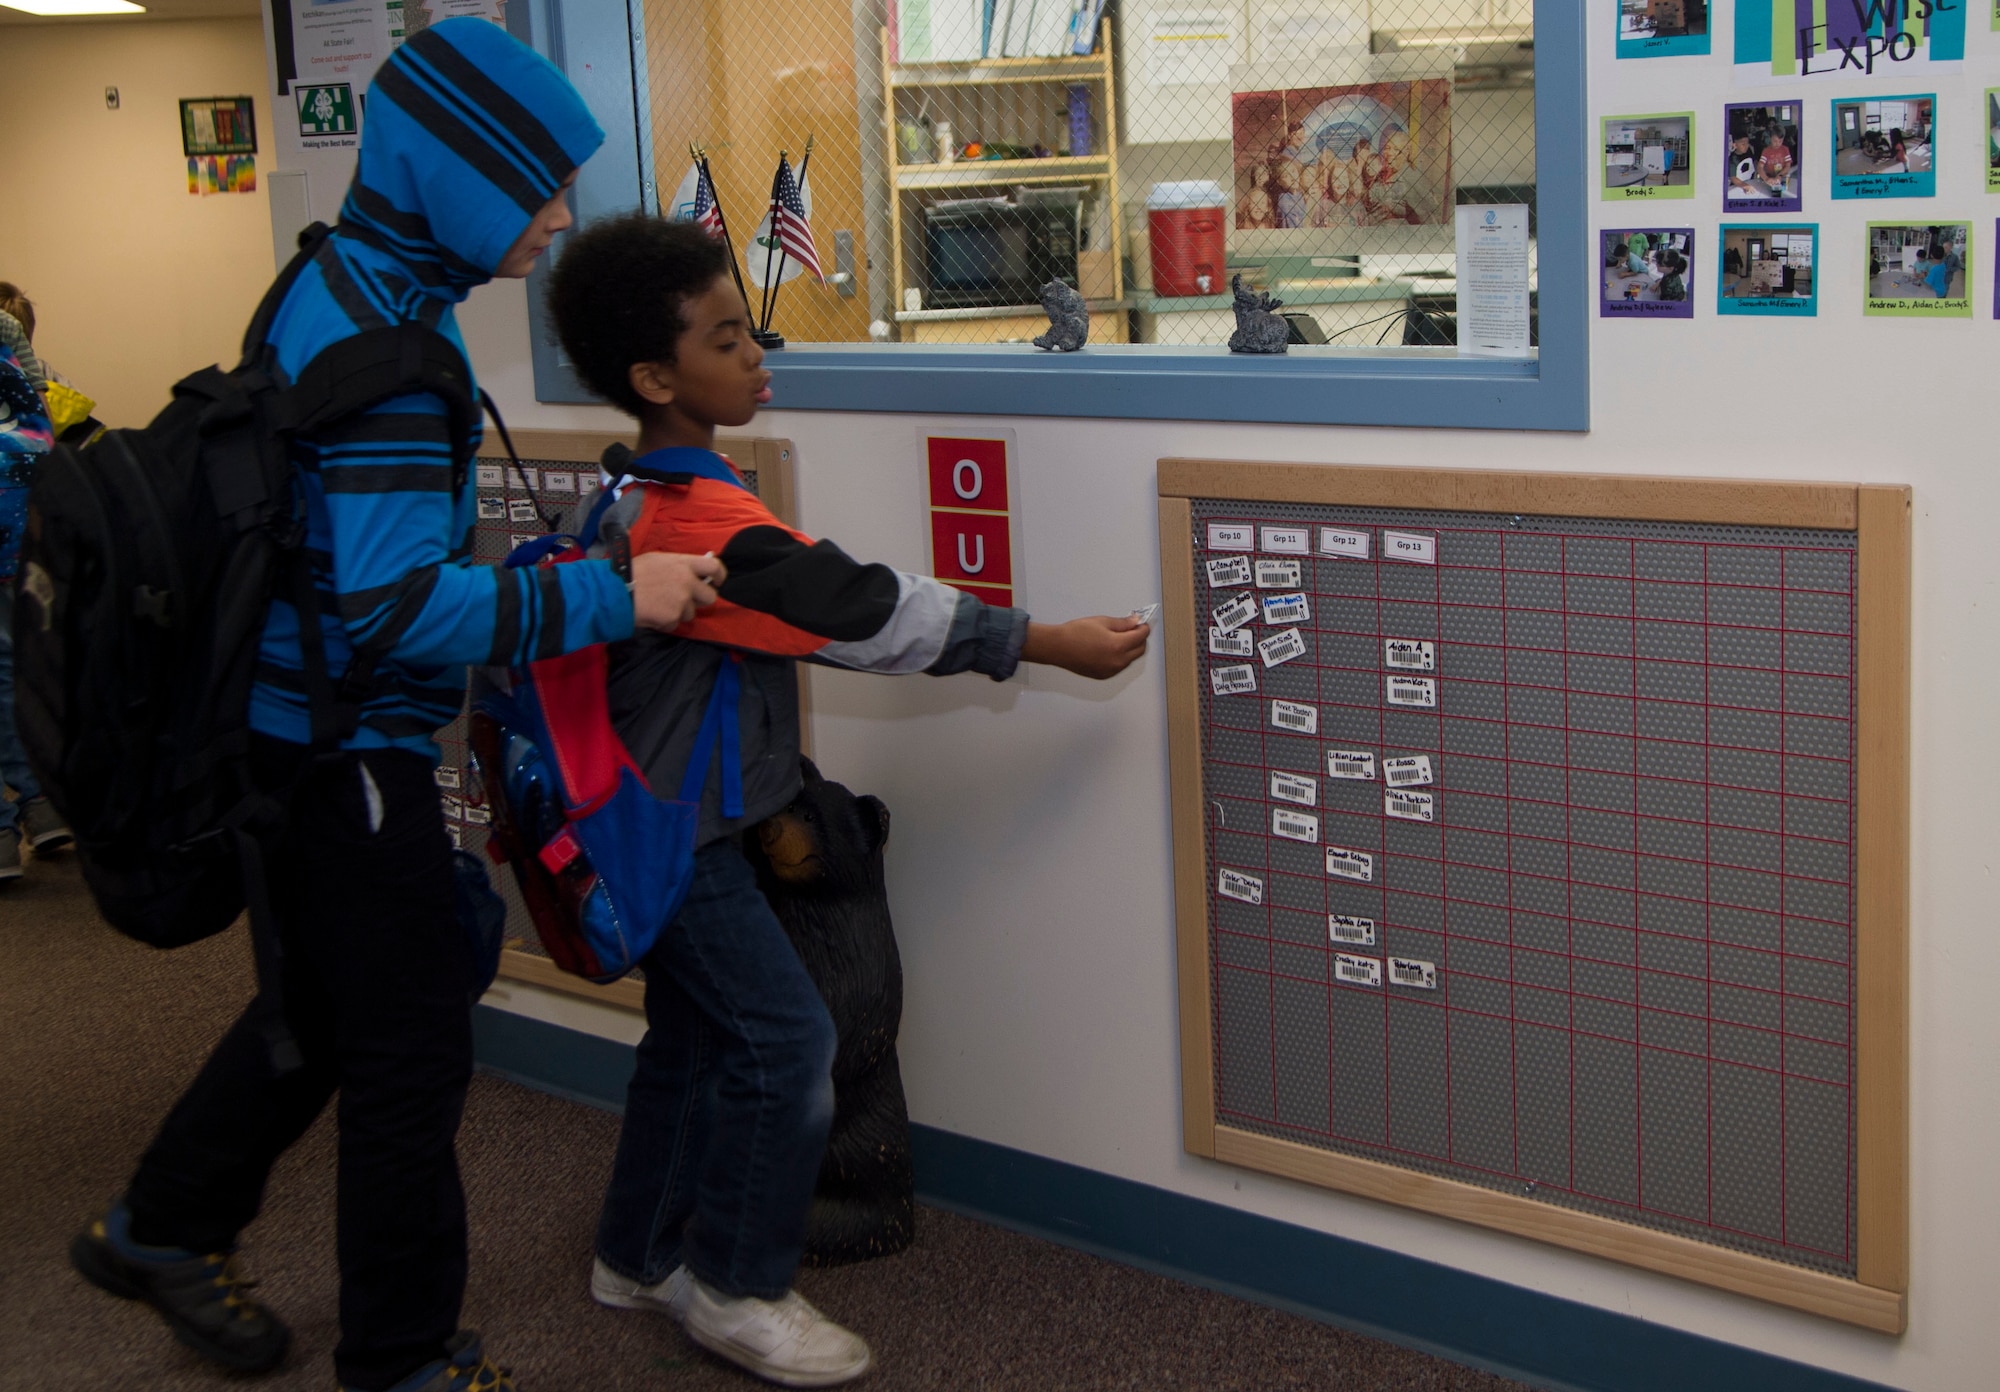 Joshua Gaspard (left to right), 9, and Devin Hogan, 7, sign their name on the board on their way to school from Ketchikan School Age Centers at Joint Base Elmendorf-Richardson, Alaska, Sept. 6, 2016. Ketchikan School Age Center offers a wide range of activities including computer lab, arts programs and field trips. (U.S. Air Force photo by Staff Sgt. Sheila deVera)